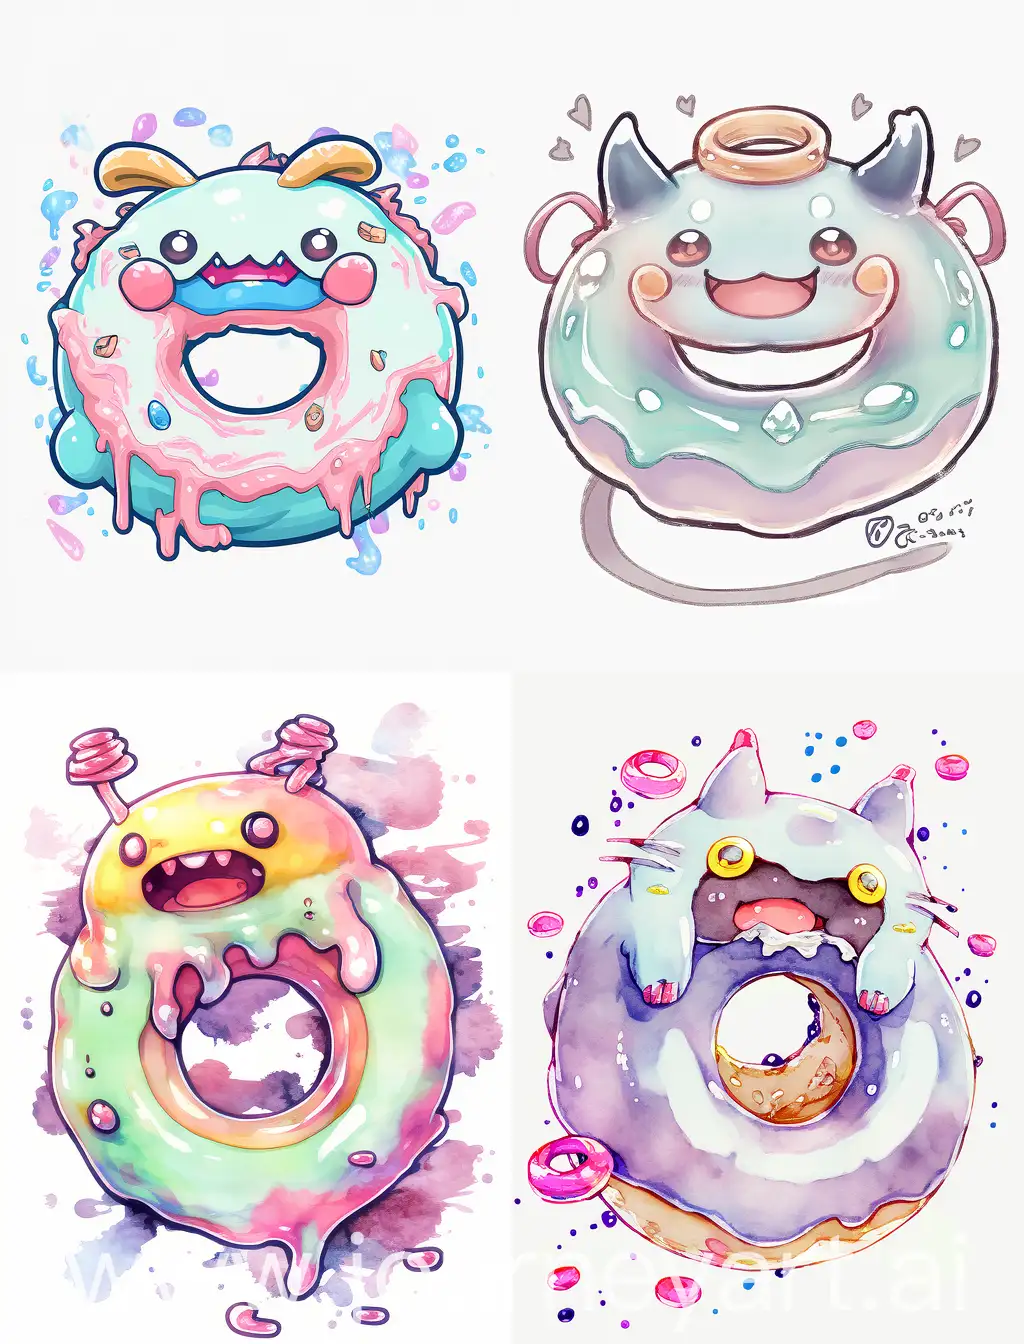 friendly slime monster, donut shaped, with cute floppy ears, watercolor anime style